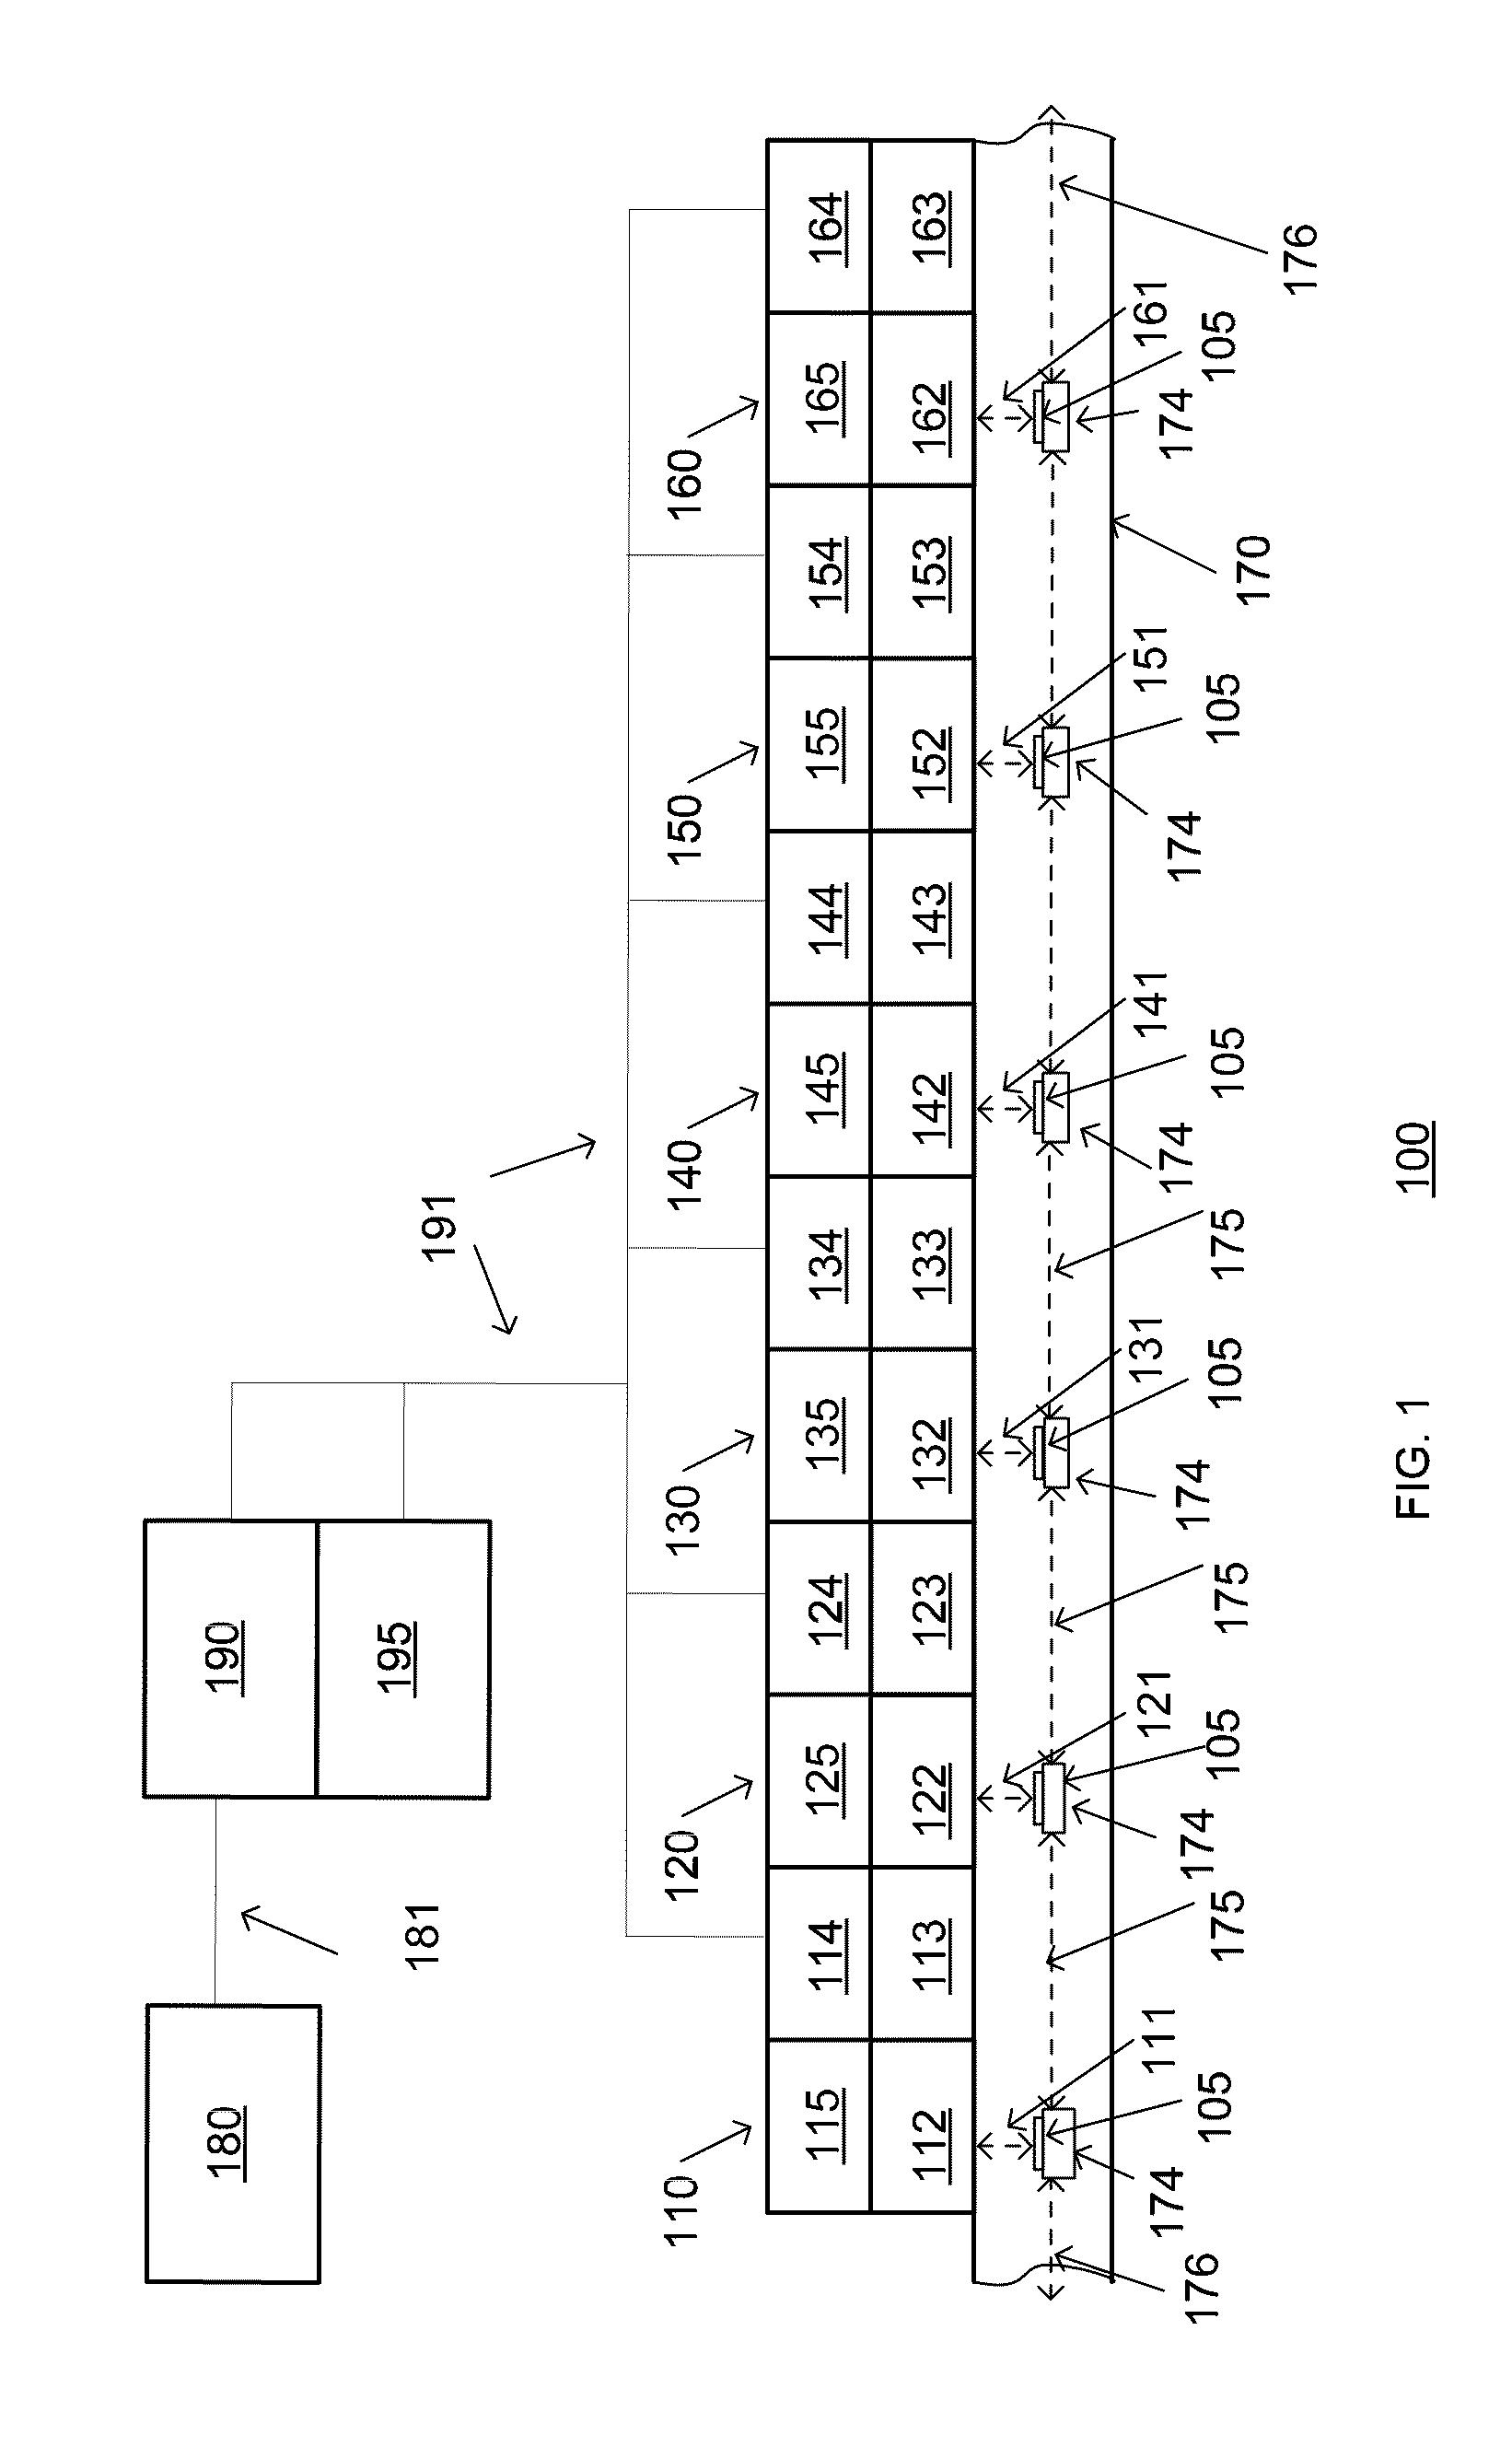 Switchable Neutral Beam Source